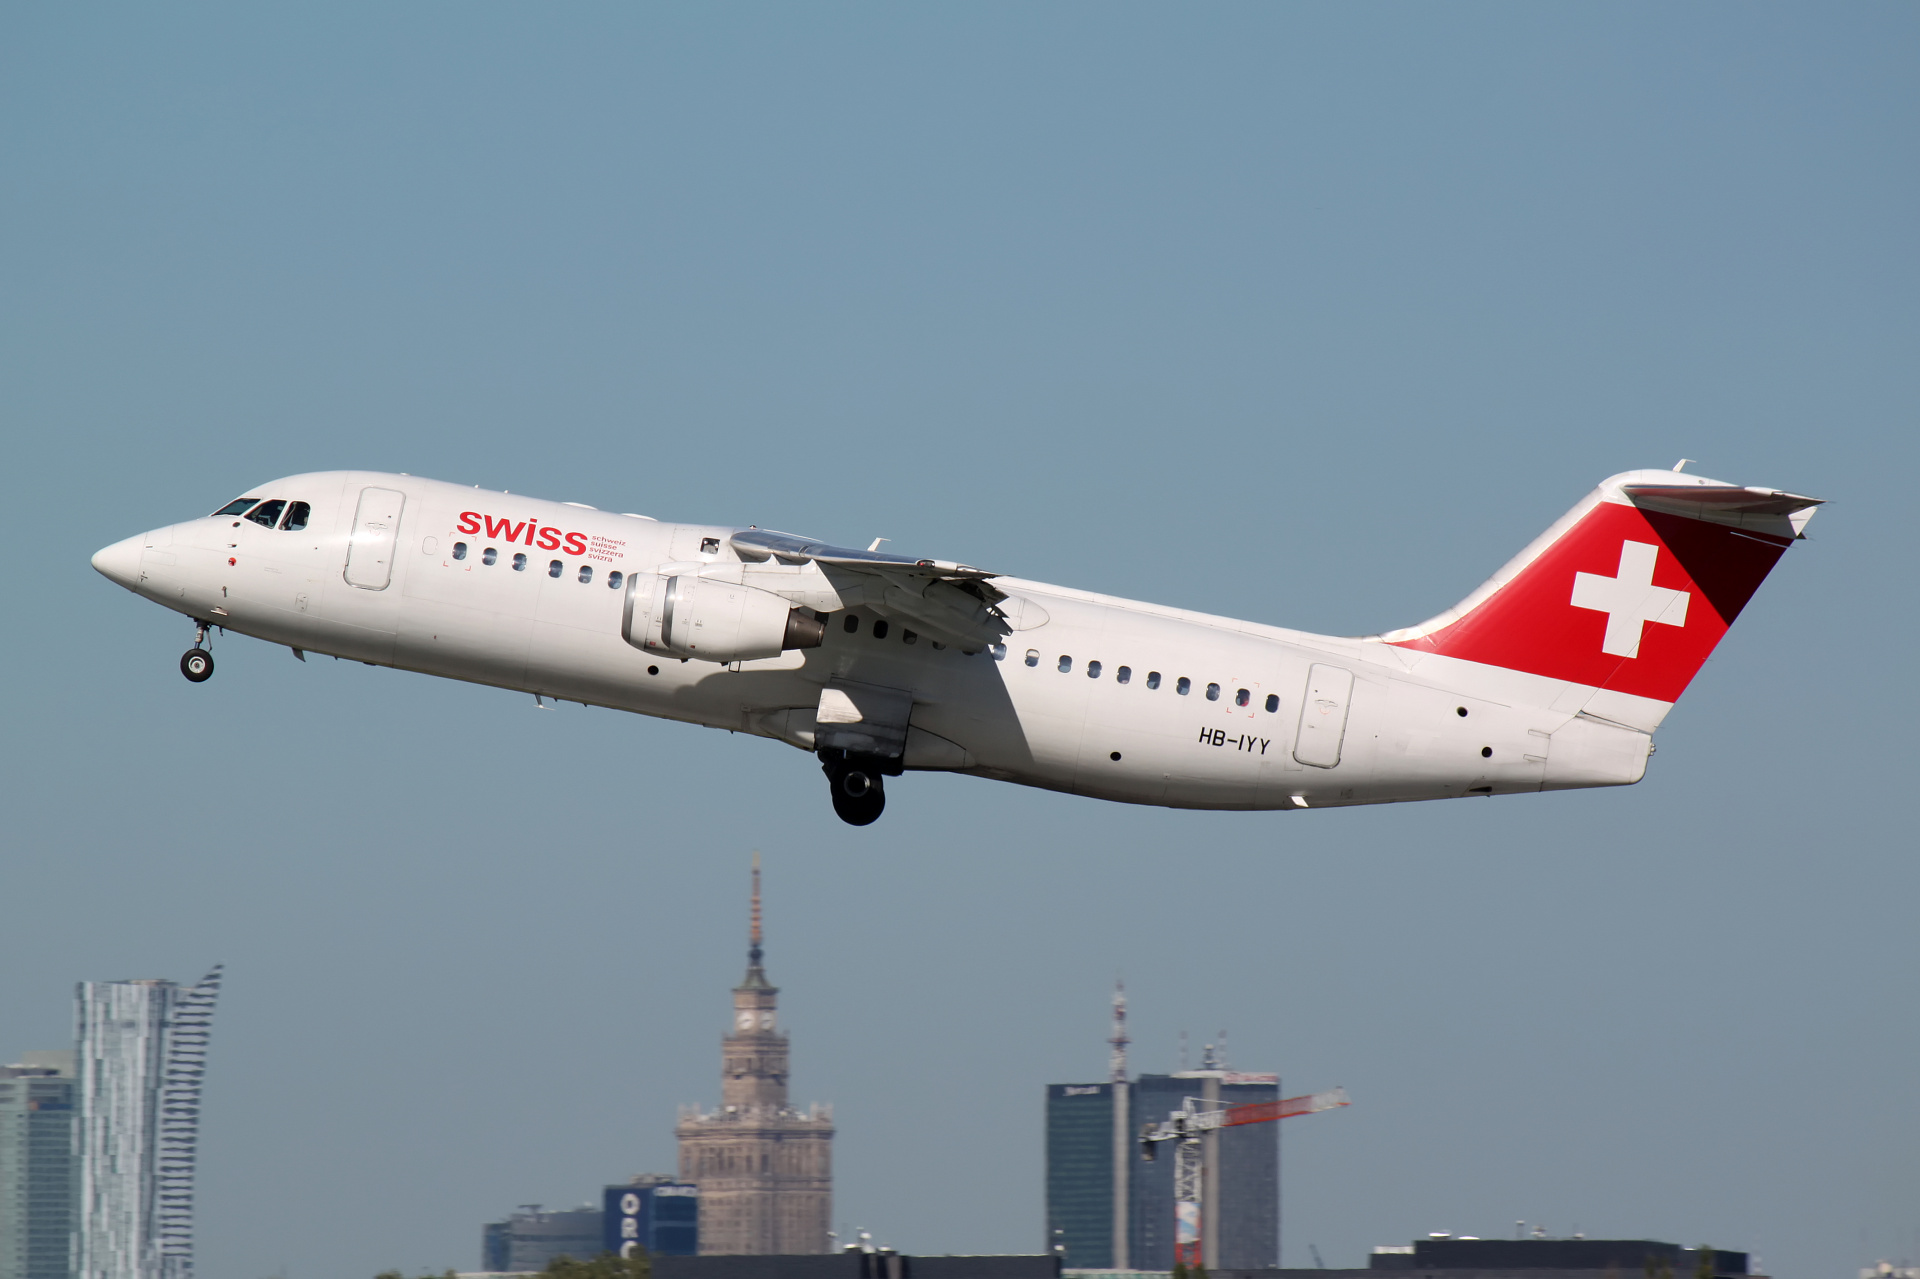 HB-IYY (Aircraft » EPWA Spotting » BAe 146 and revisions » Avro RJ100 » Swiss Global Air Lines)